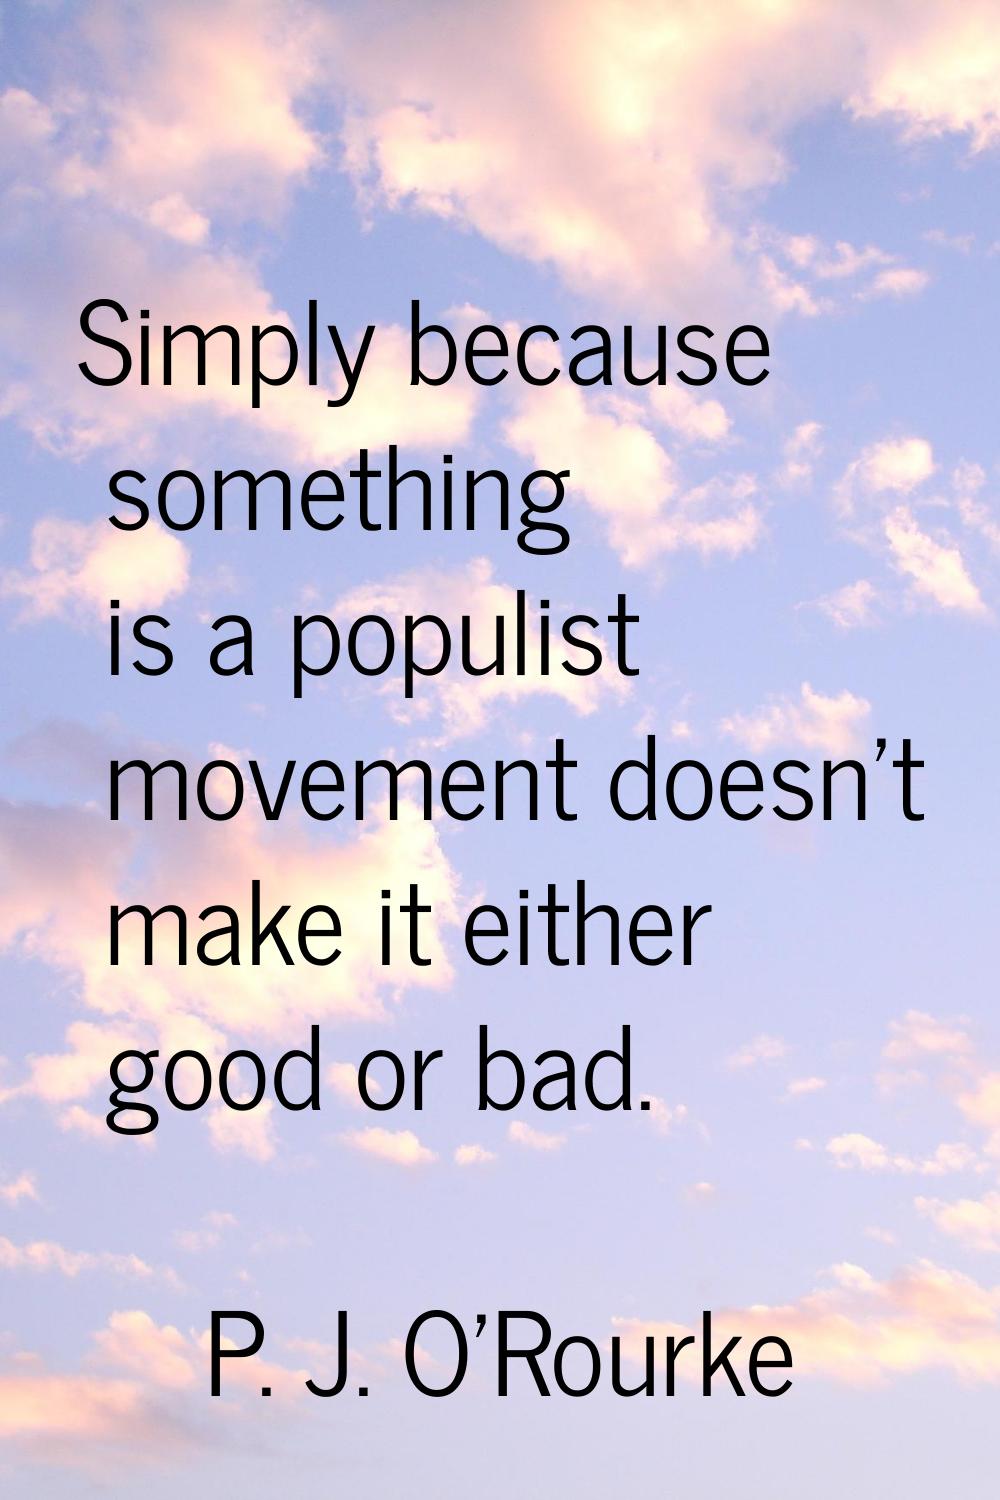 Simply because something is a populist movement doesn't make it either good or bad.